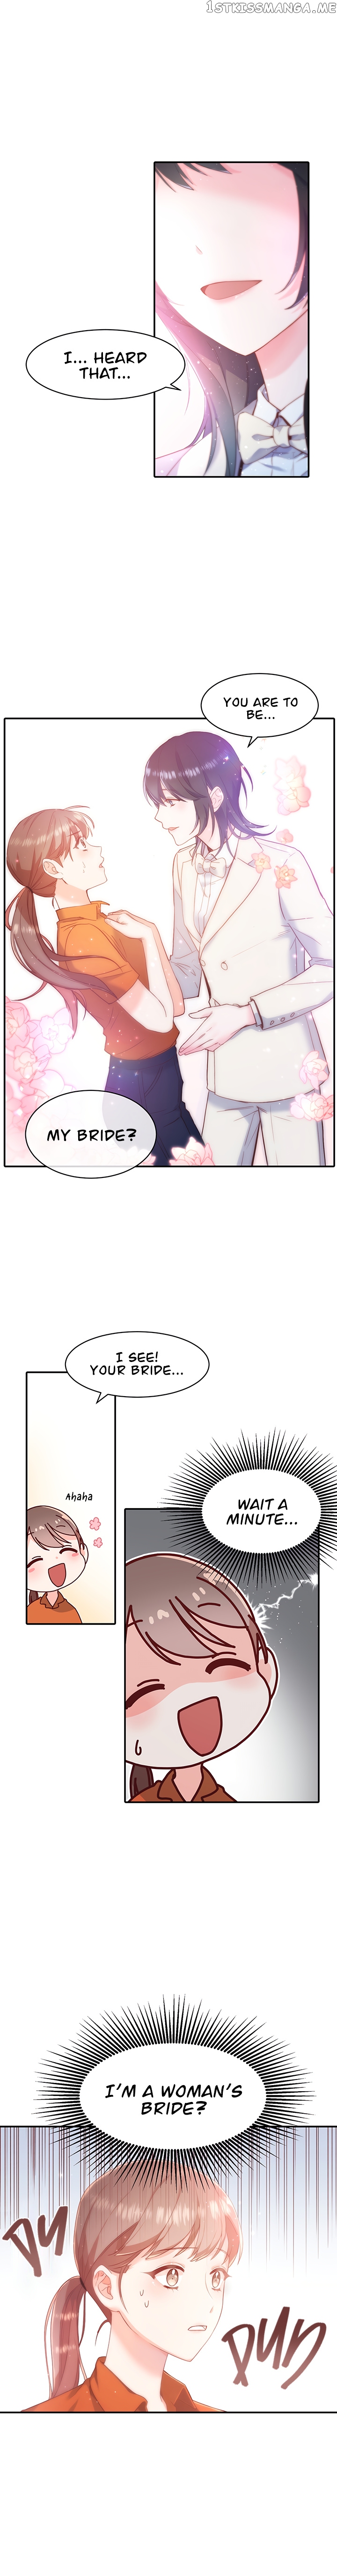 Become Her Bride chapter 1 - page 10